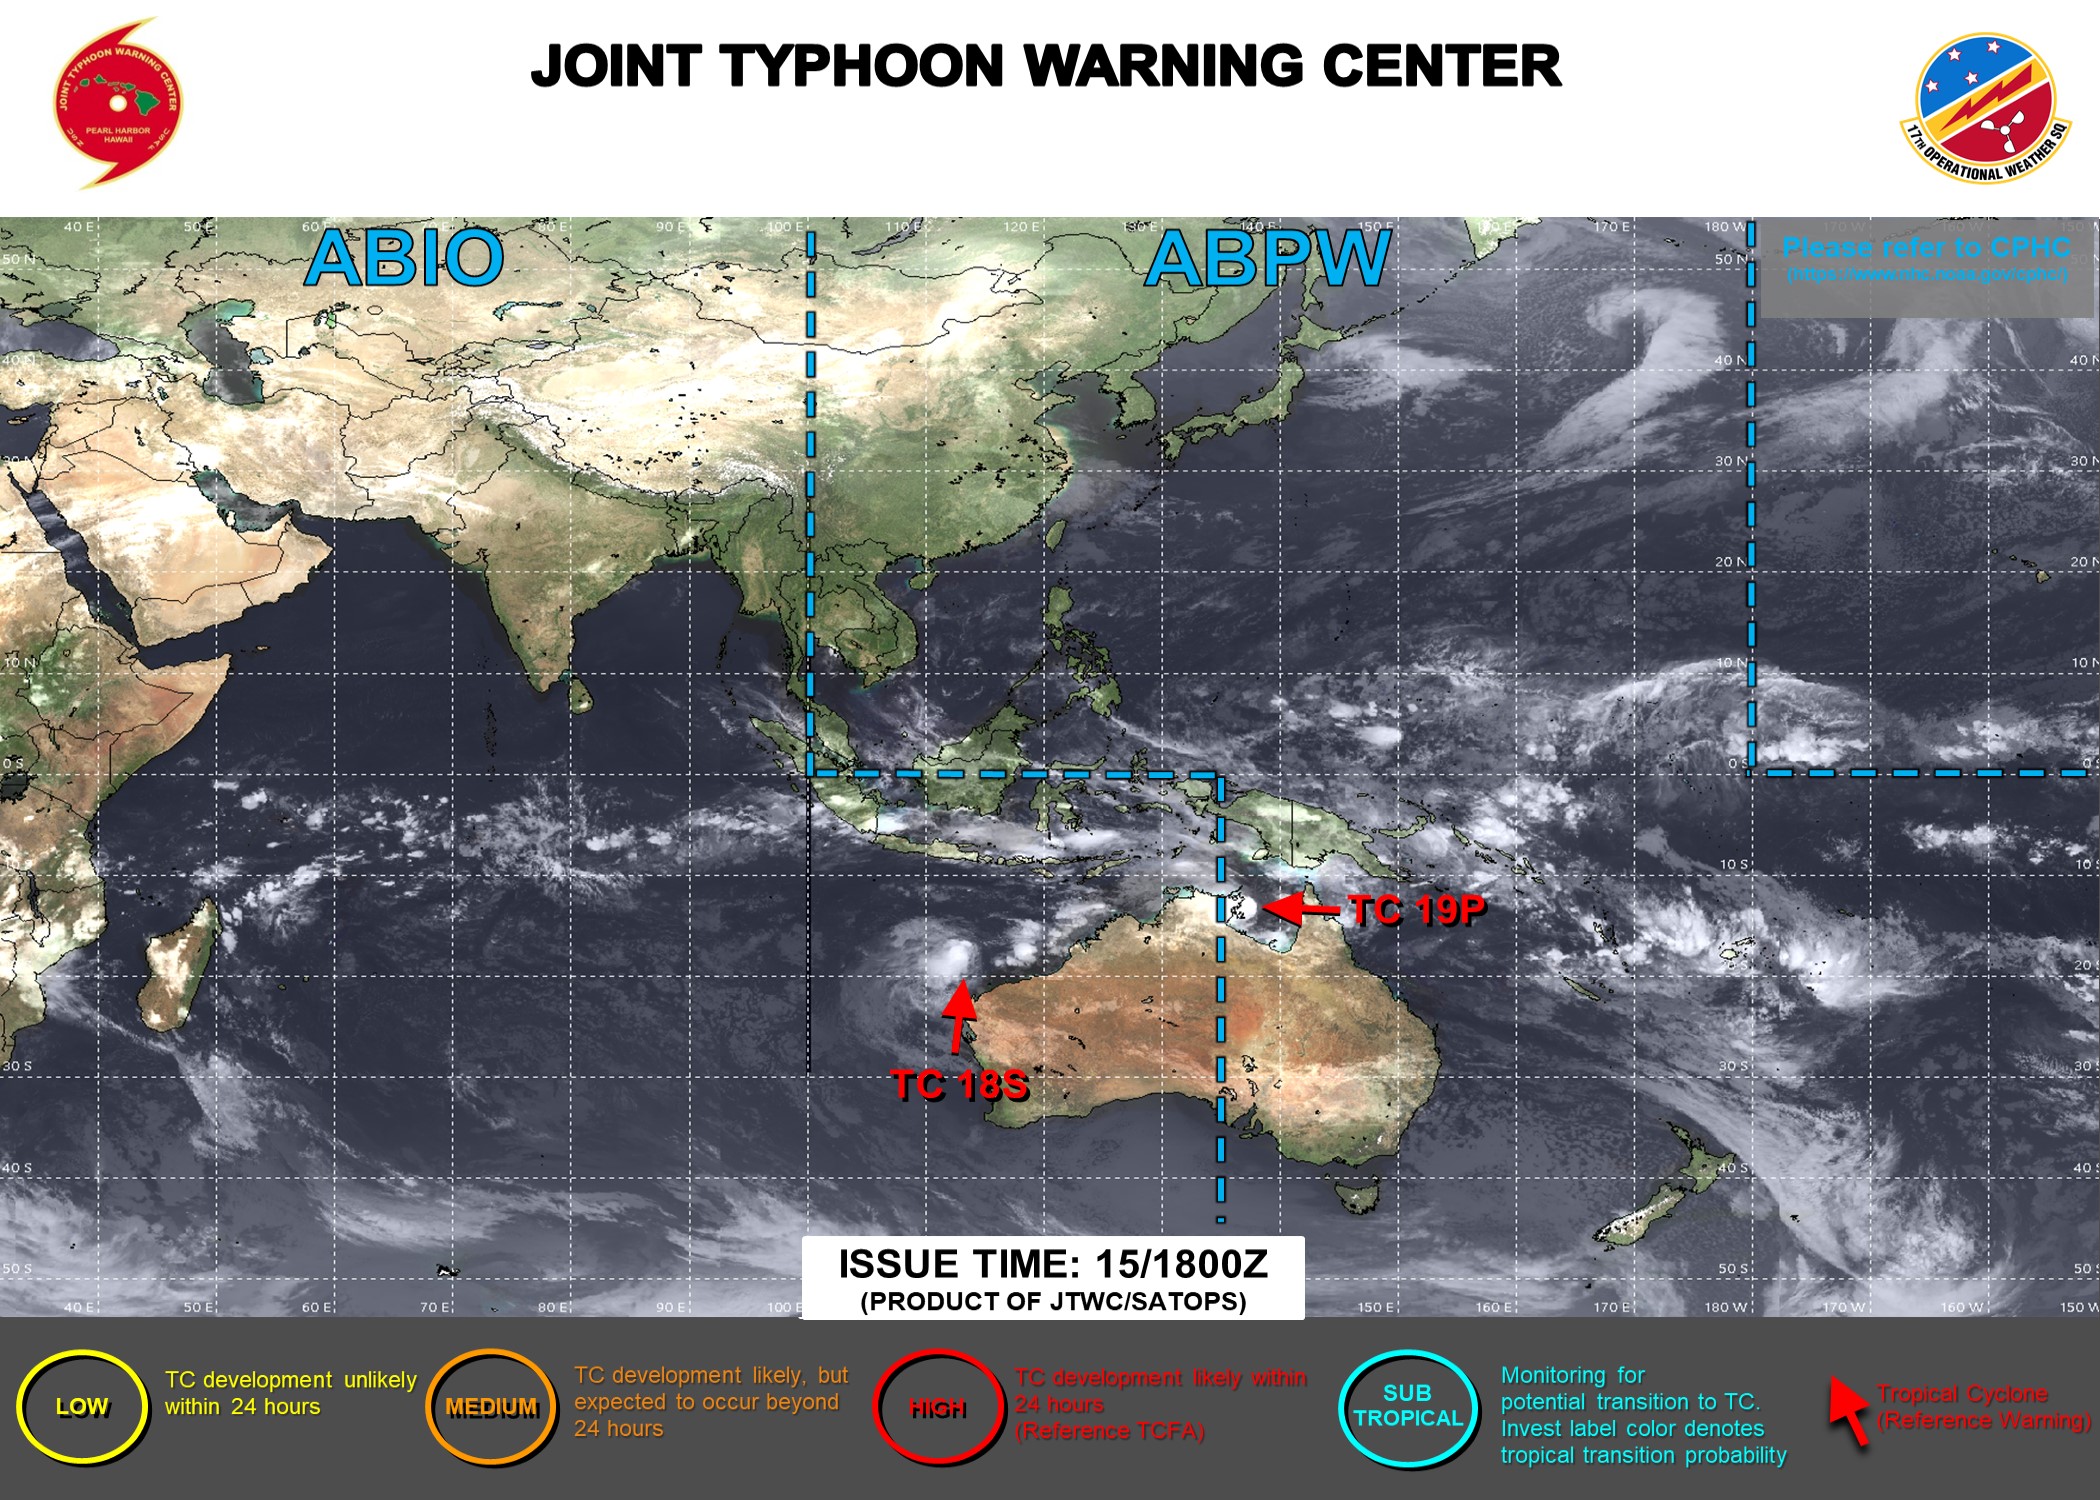 JTWC IS ISSUING 6HOURLY WARNINGS AND 12HOURLY SATELLITE BULLETINS ON TC 18S AND ON TC 19P